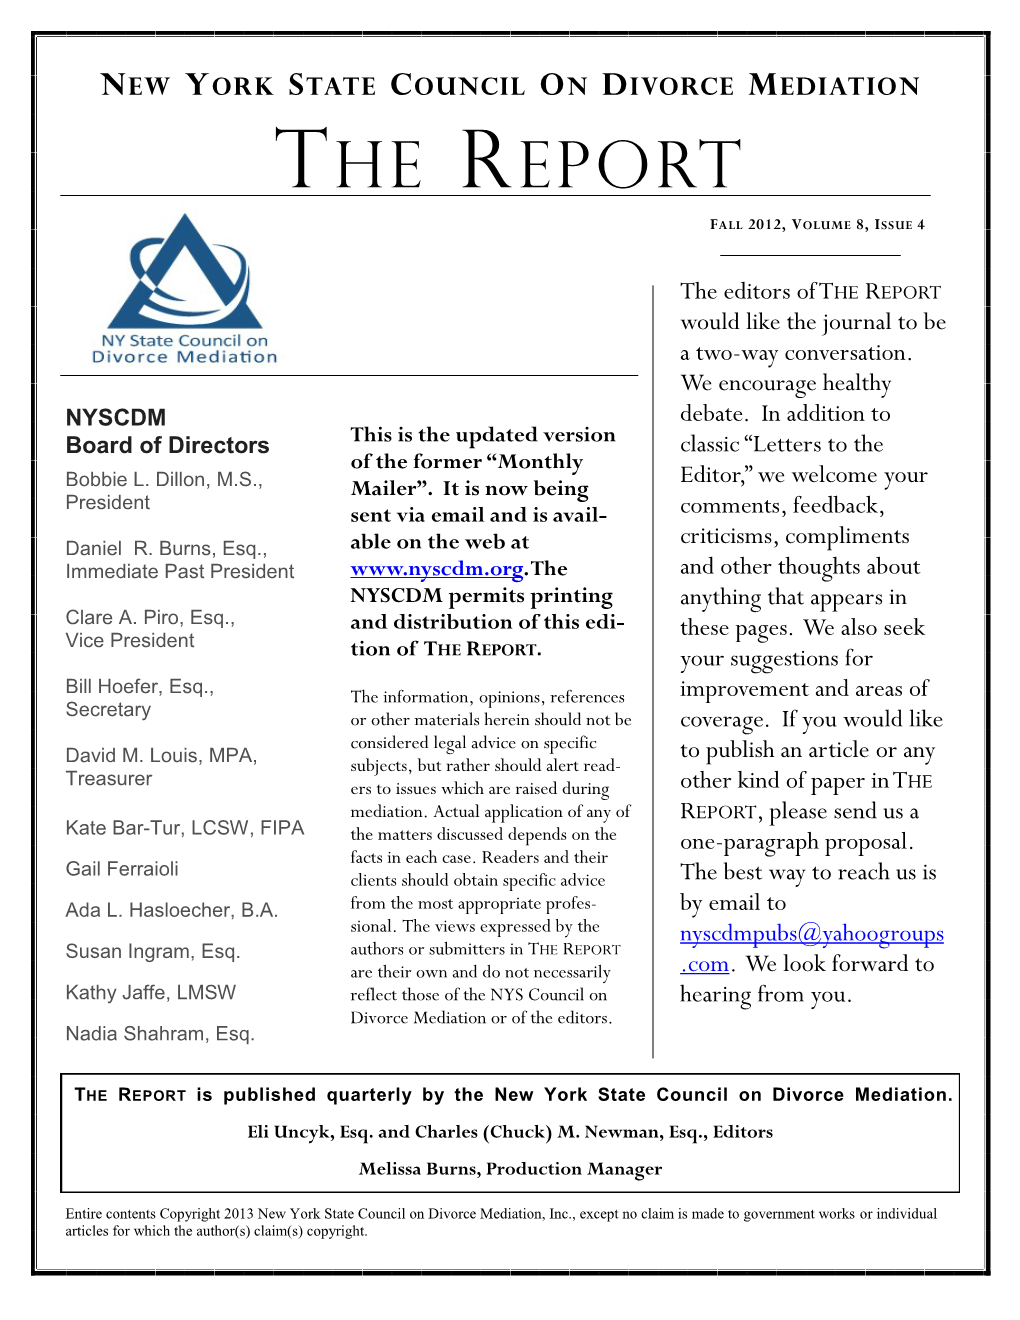 The Report Fall 2012 Volume 8 Issue 4